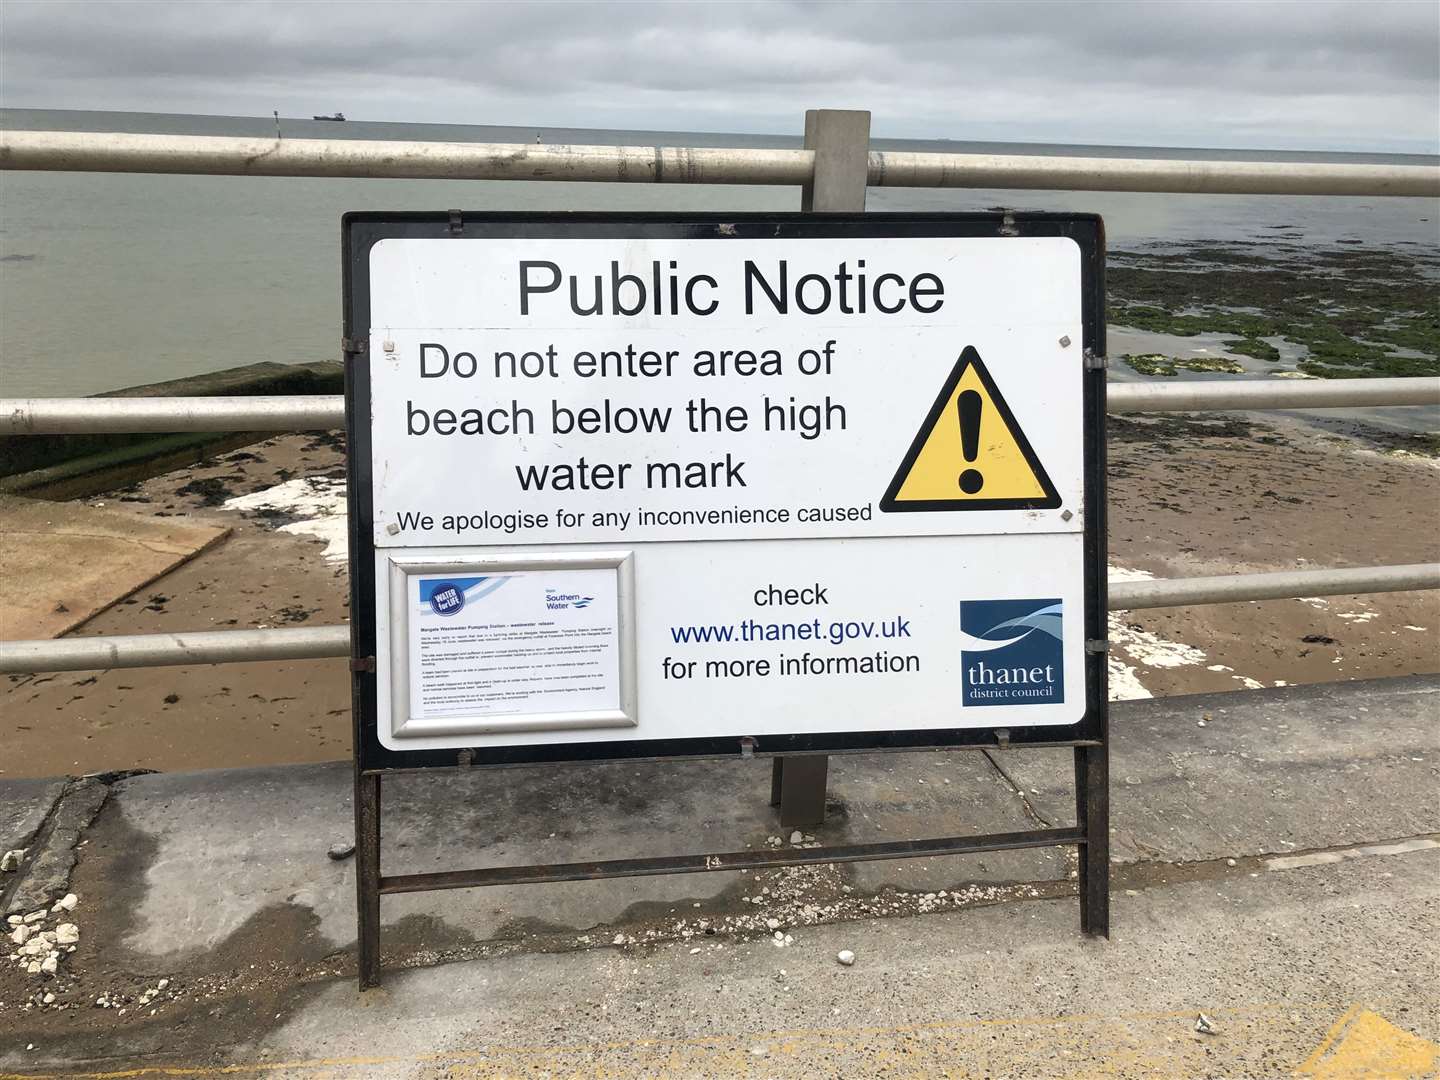 Signs have been placed around Walpole tidal pool warning swimmers not to enter the sea. Picture: Tim Garratt